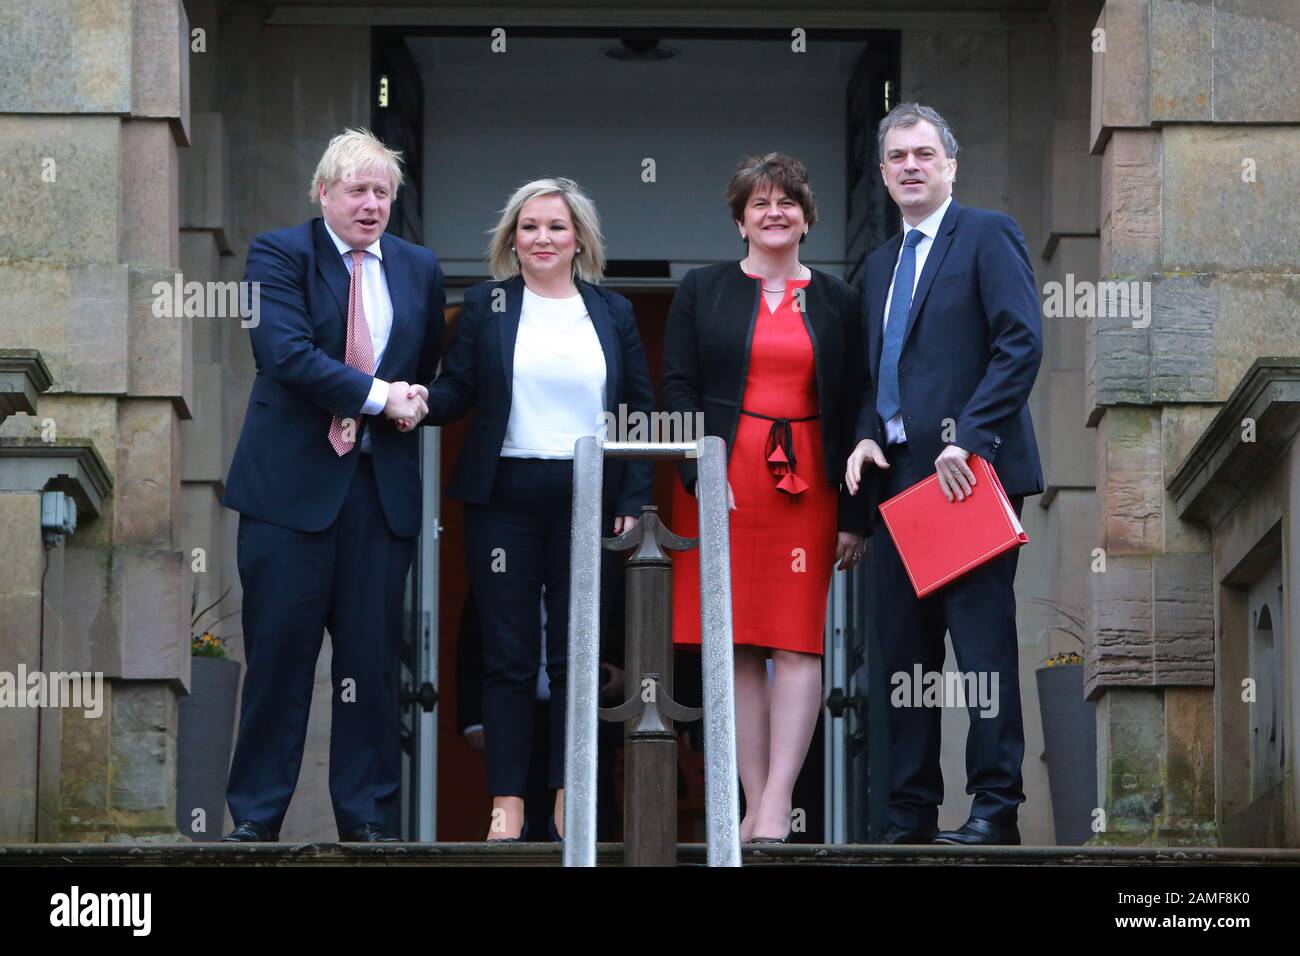 Belfast, Northern Ireland. 13th Jan 2020. British Prime Minister Boris Johnston (left) and Secretary of State for Northern Ireland Julian Smith (right) is greeted by the new Deputy First Minister Michelle O'Neill and First Minister Arlene Foster at Stormont Castle, Belfast, Northern Ireland on Jan 13, 2020. Prime Minister Boris Johnson has arrived at Stormont to mark the restoration of devolution in Northern Ireland. Taoiseach (Irish prime minister) Leo Varadkar is due later on Monday. Credit: Irish Eye/Alamy Live News Stock Photo